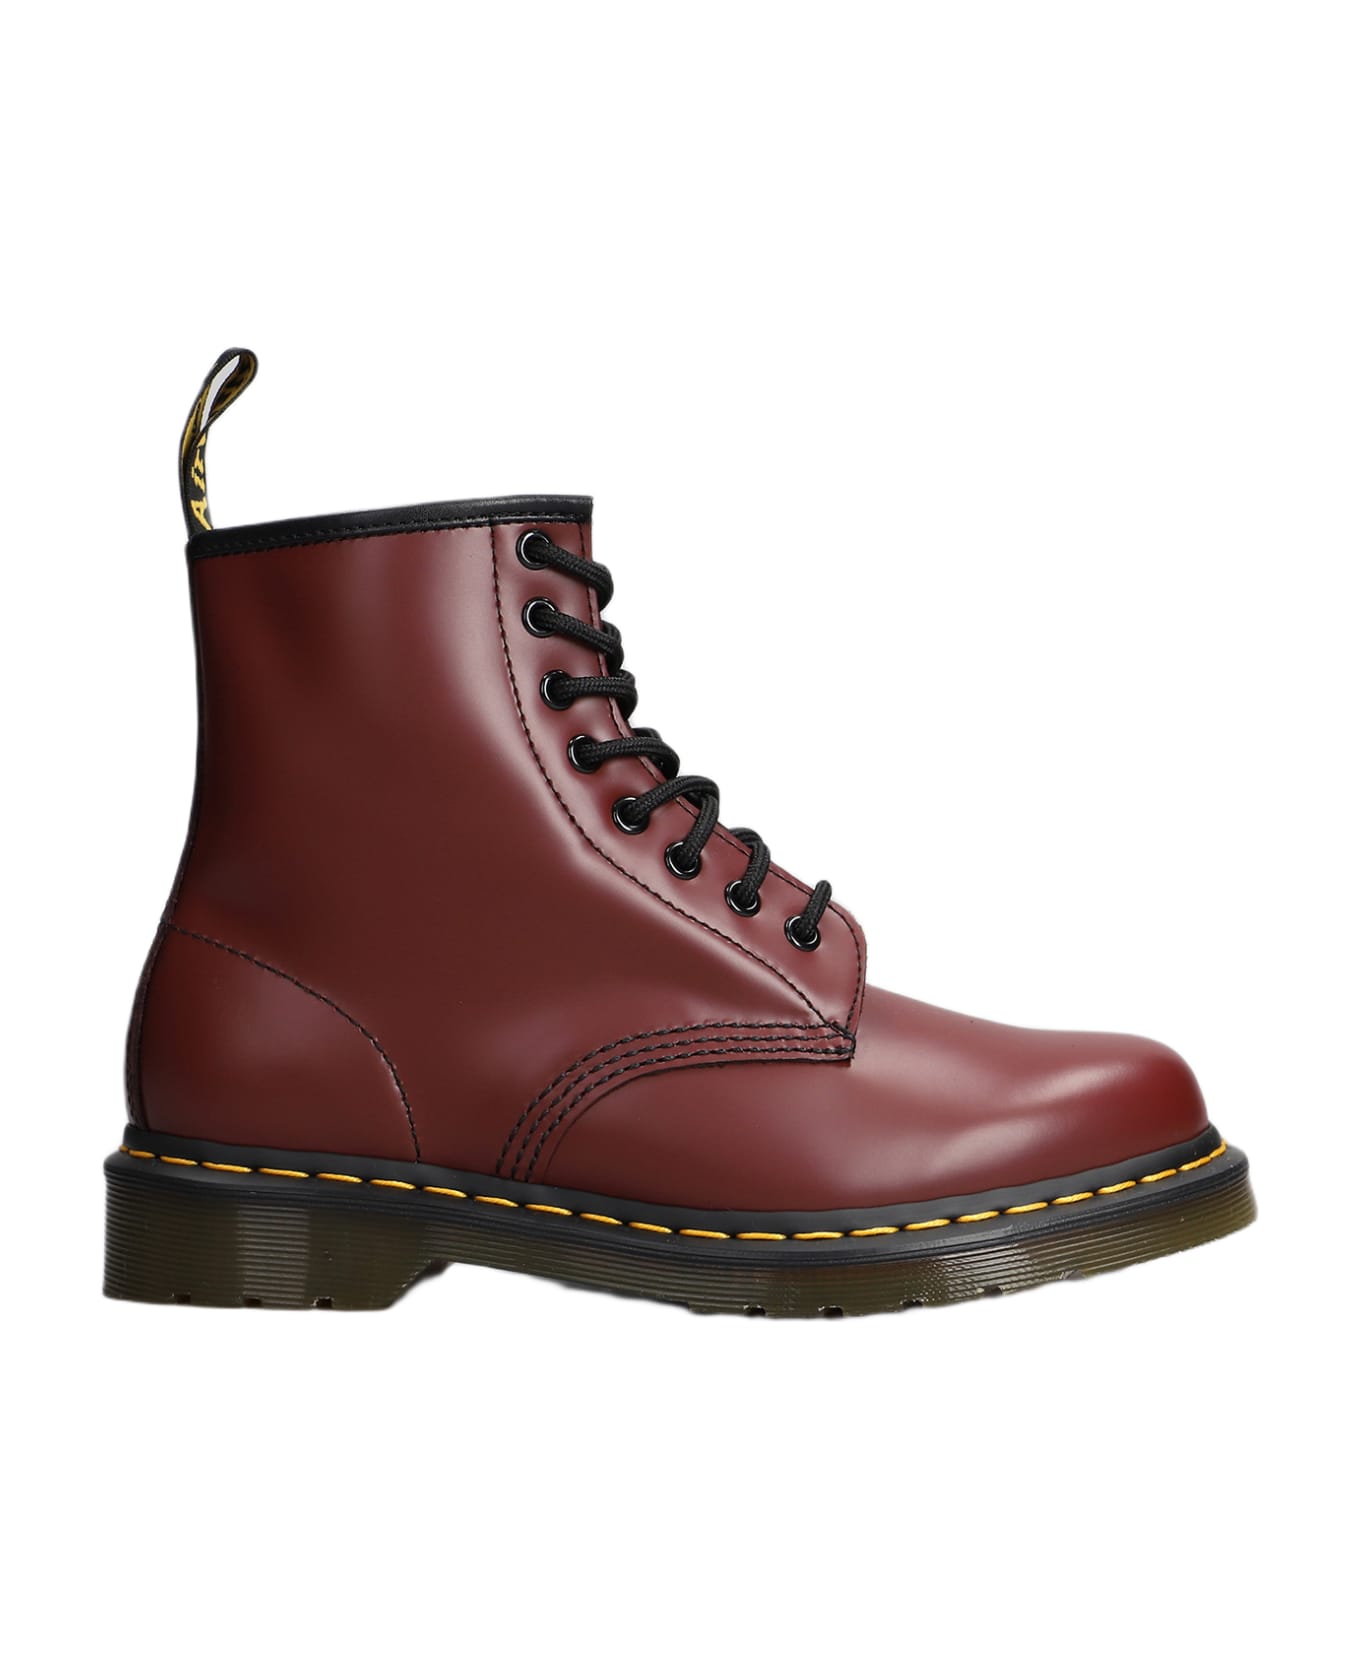 Dr. Martens 1460 Smooth Combat Boots - red シューズ